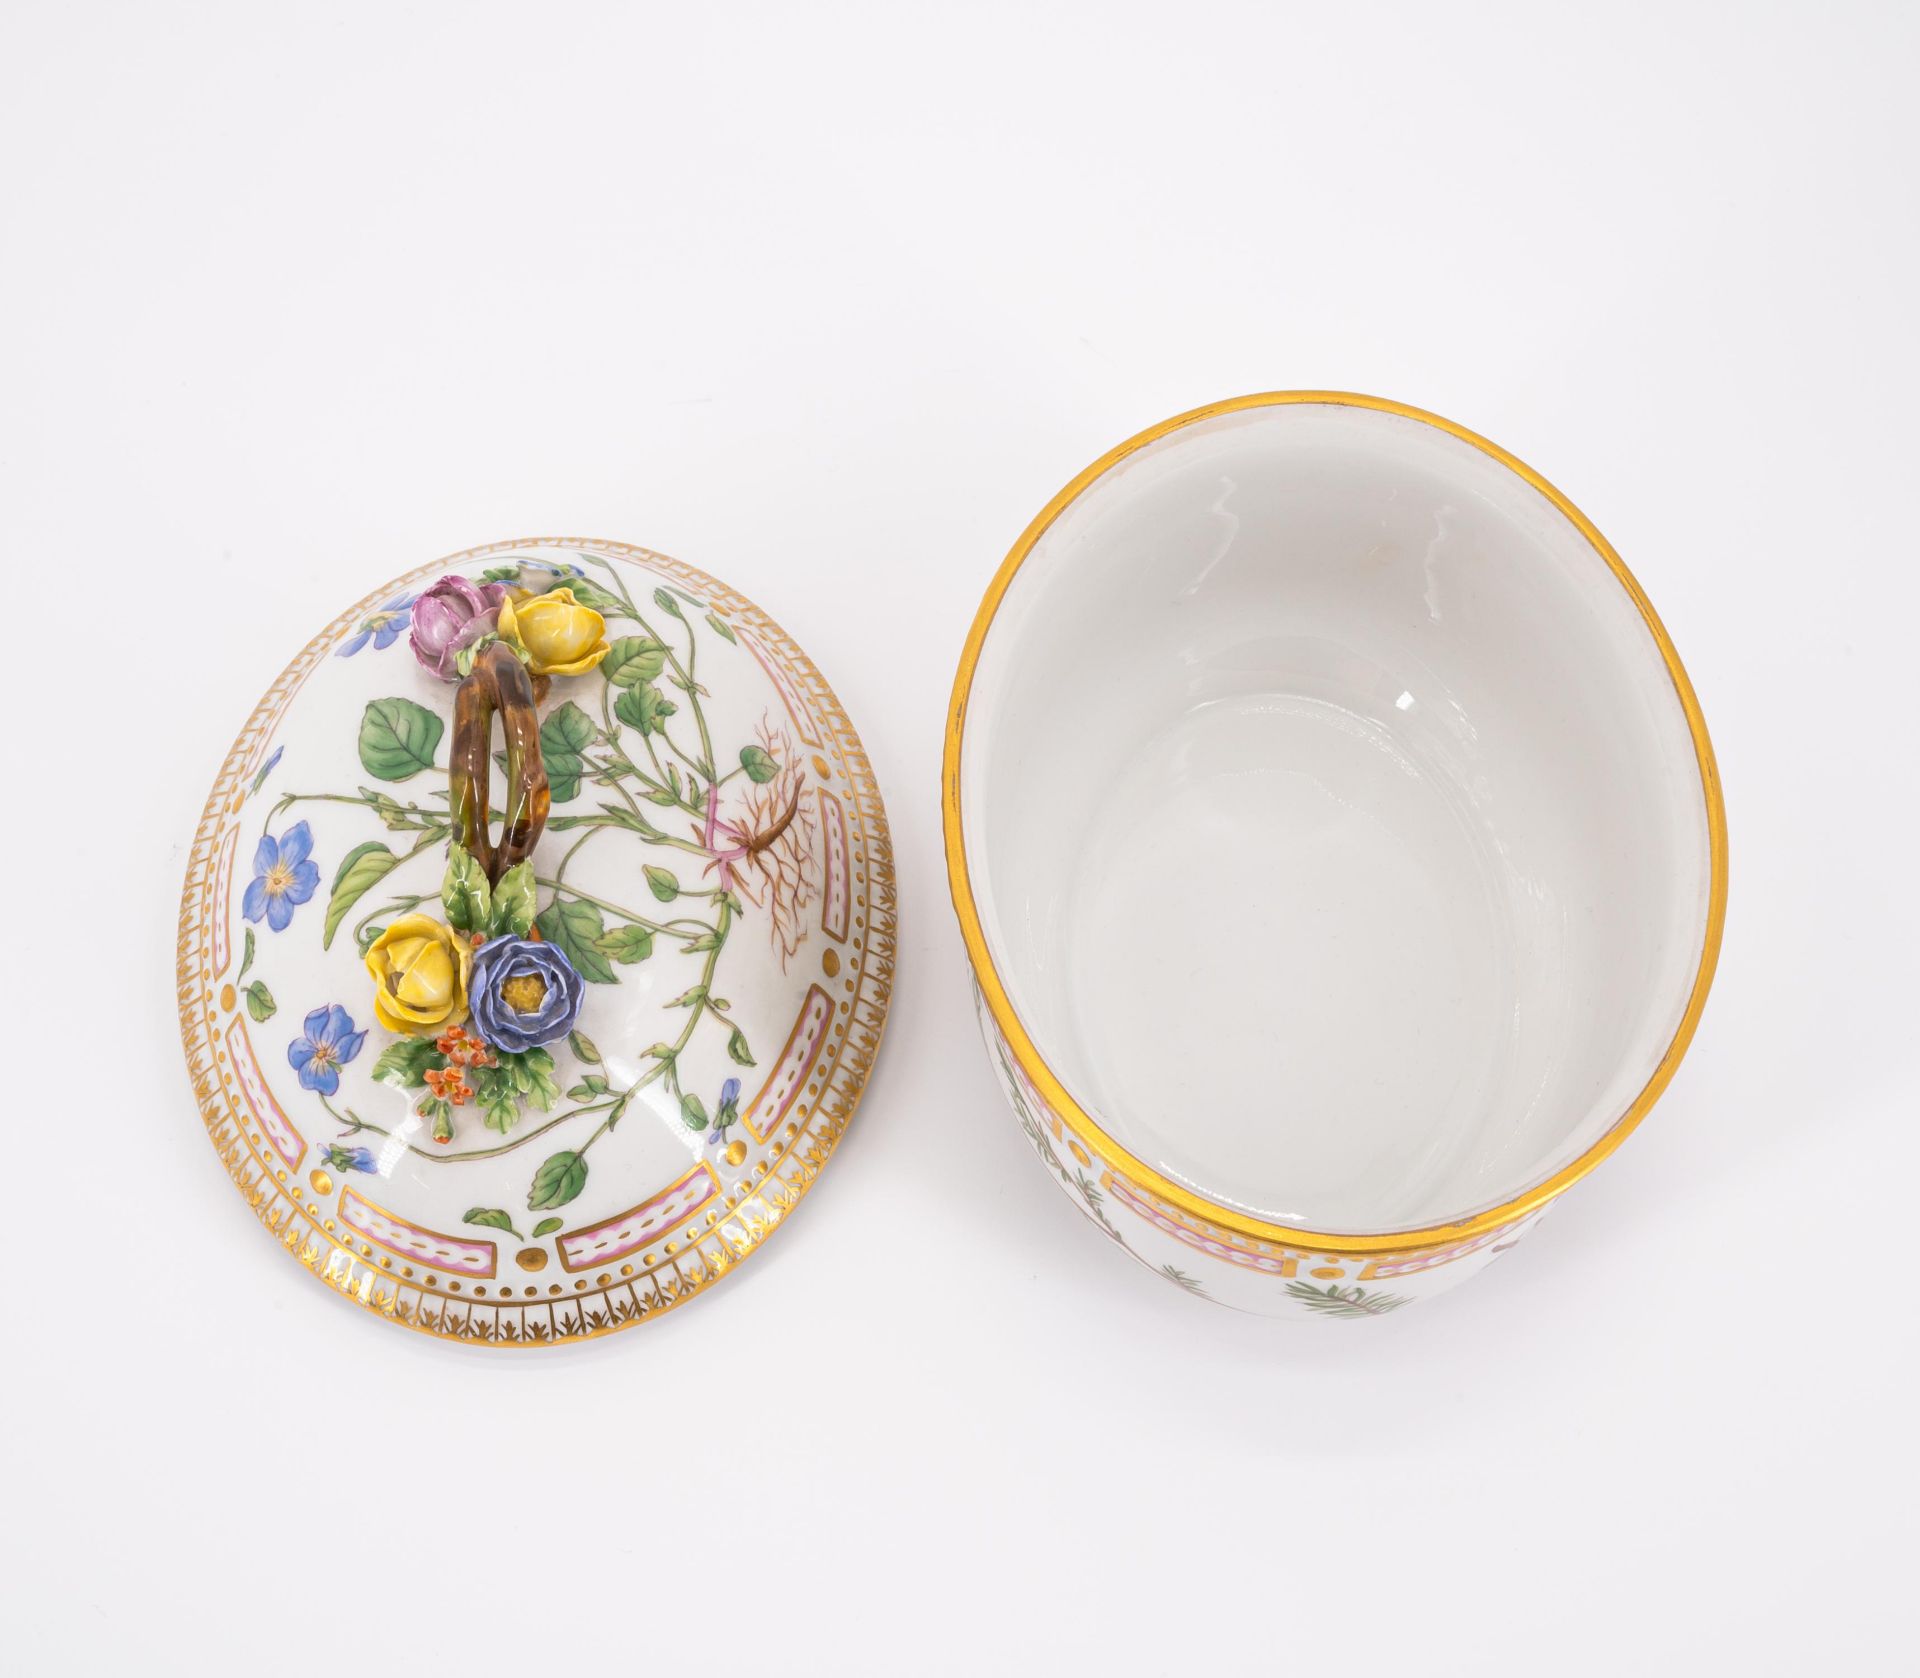 Royal Copenhagen: 95 PIECES FROM A 'FLORA DANICA' DINING SERVICE - Image 16 of 26